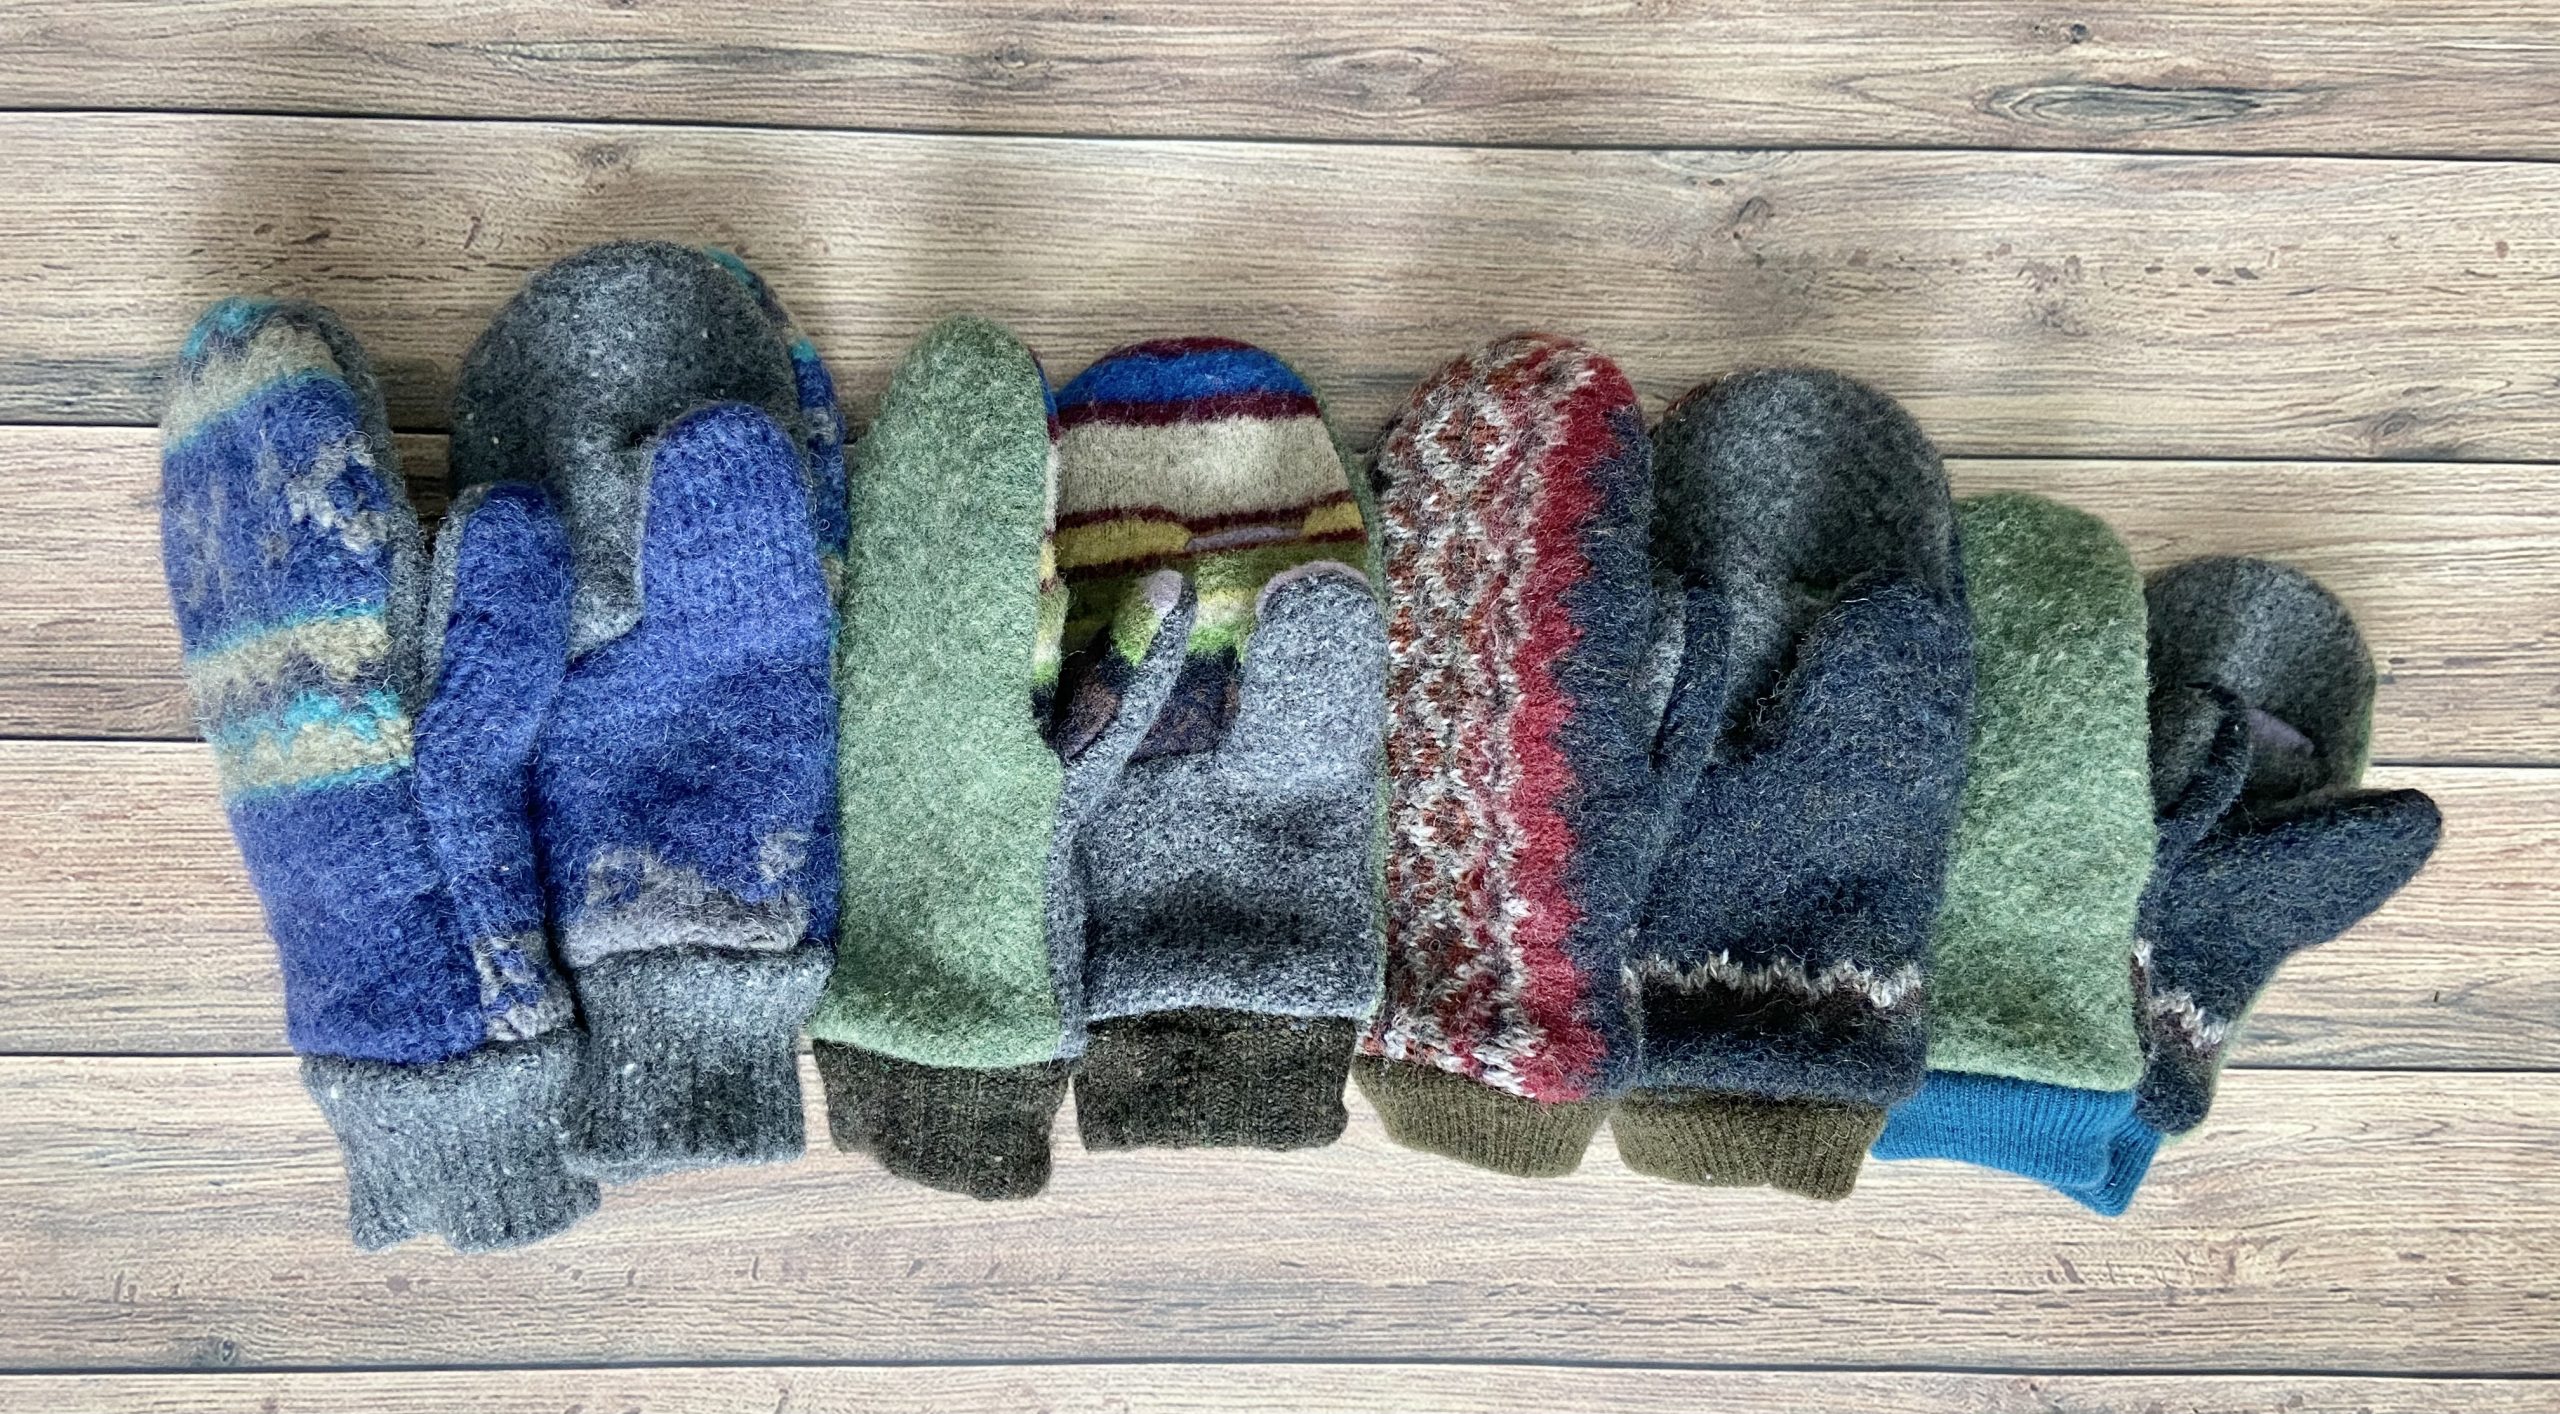 Variety of wooly mittens